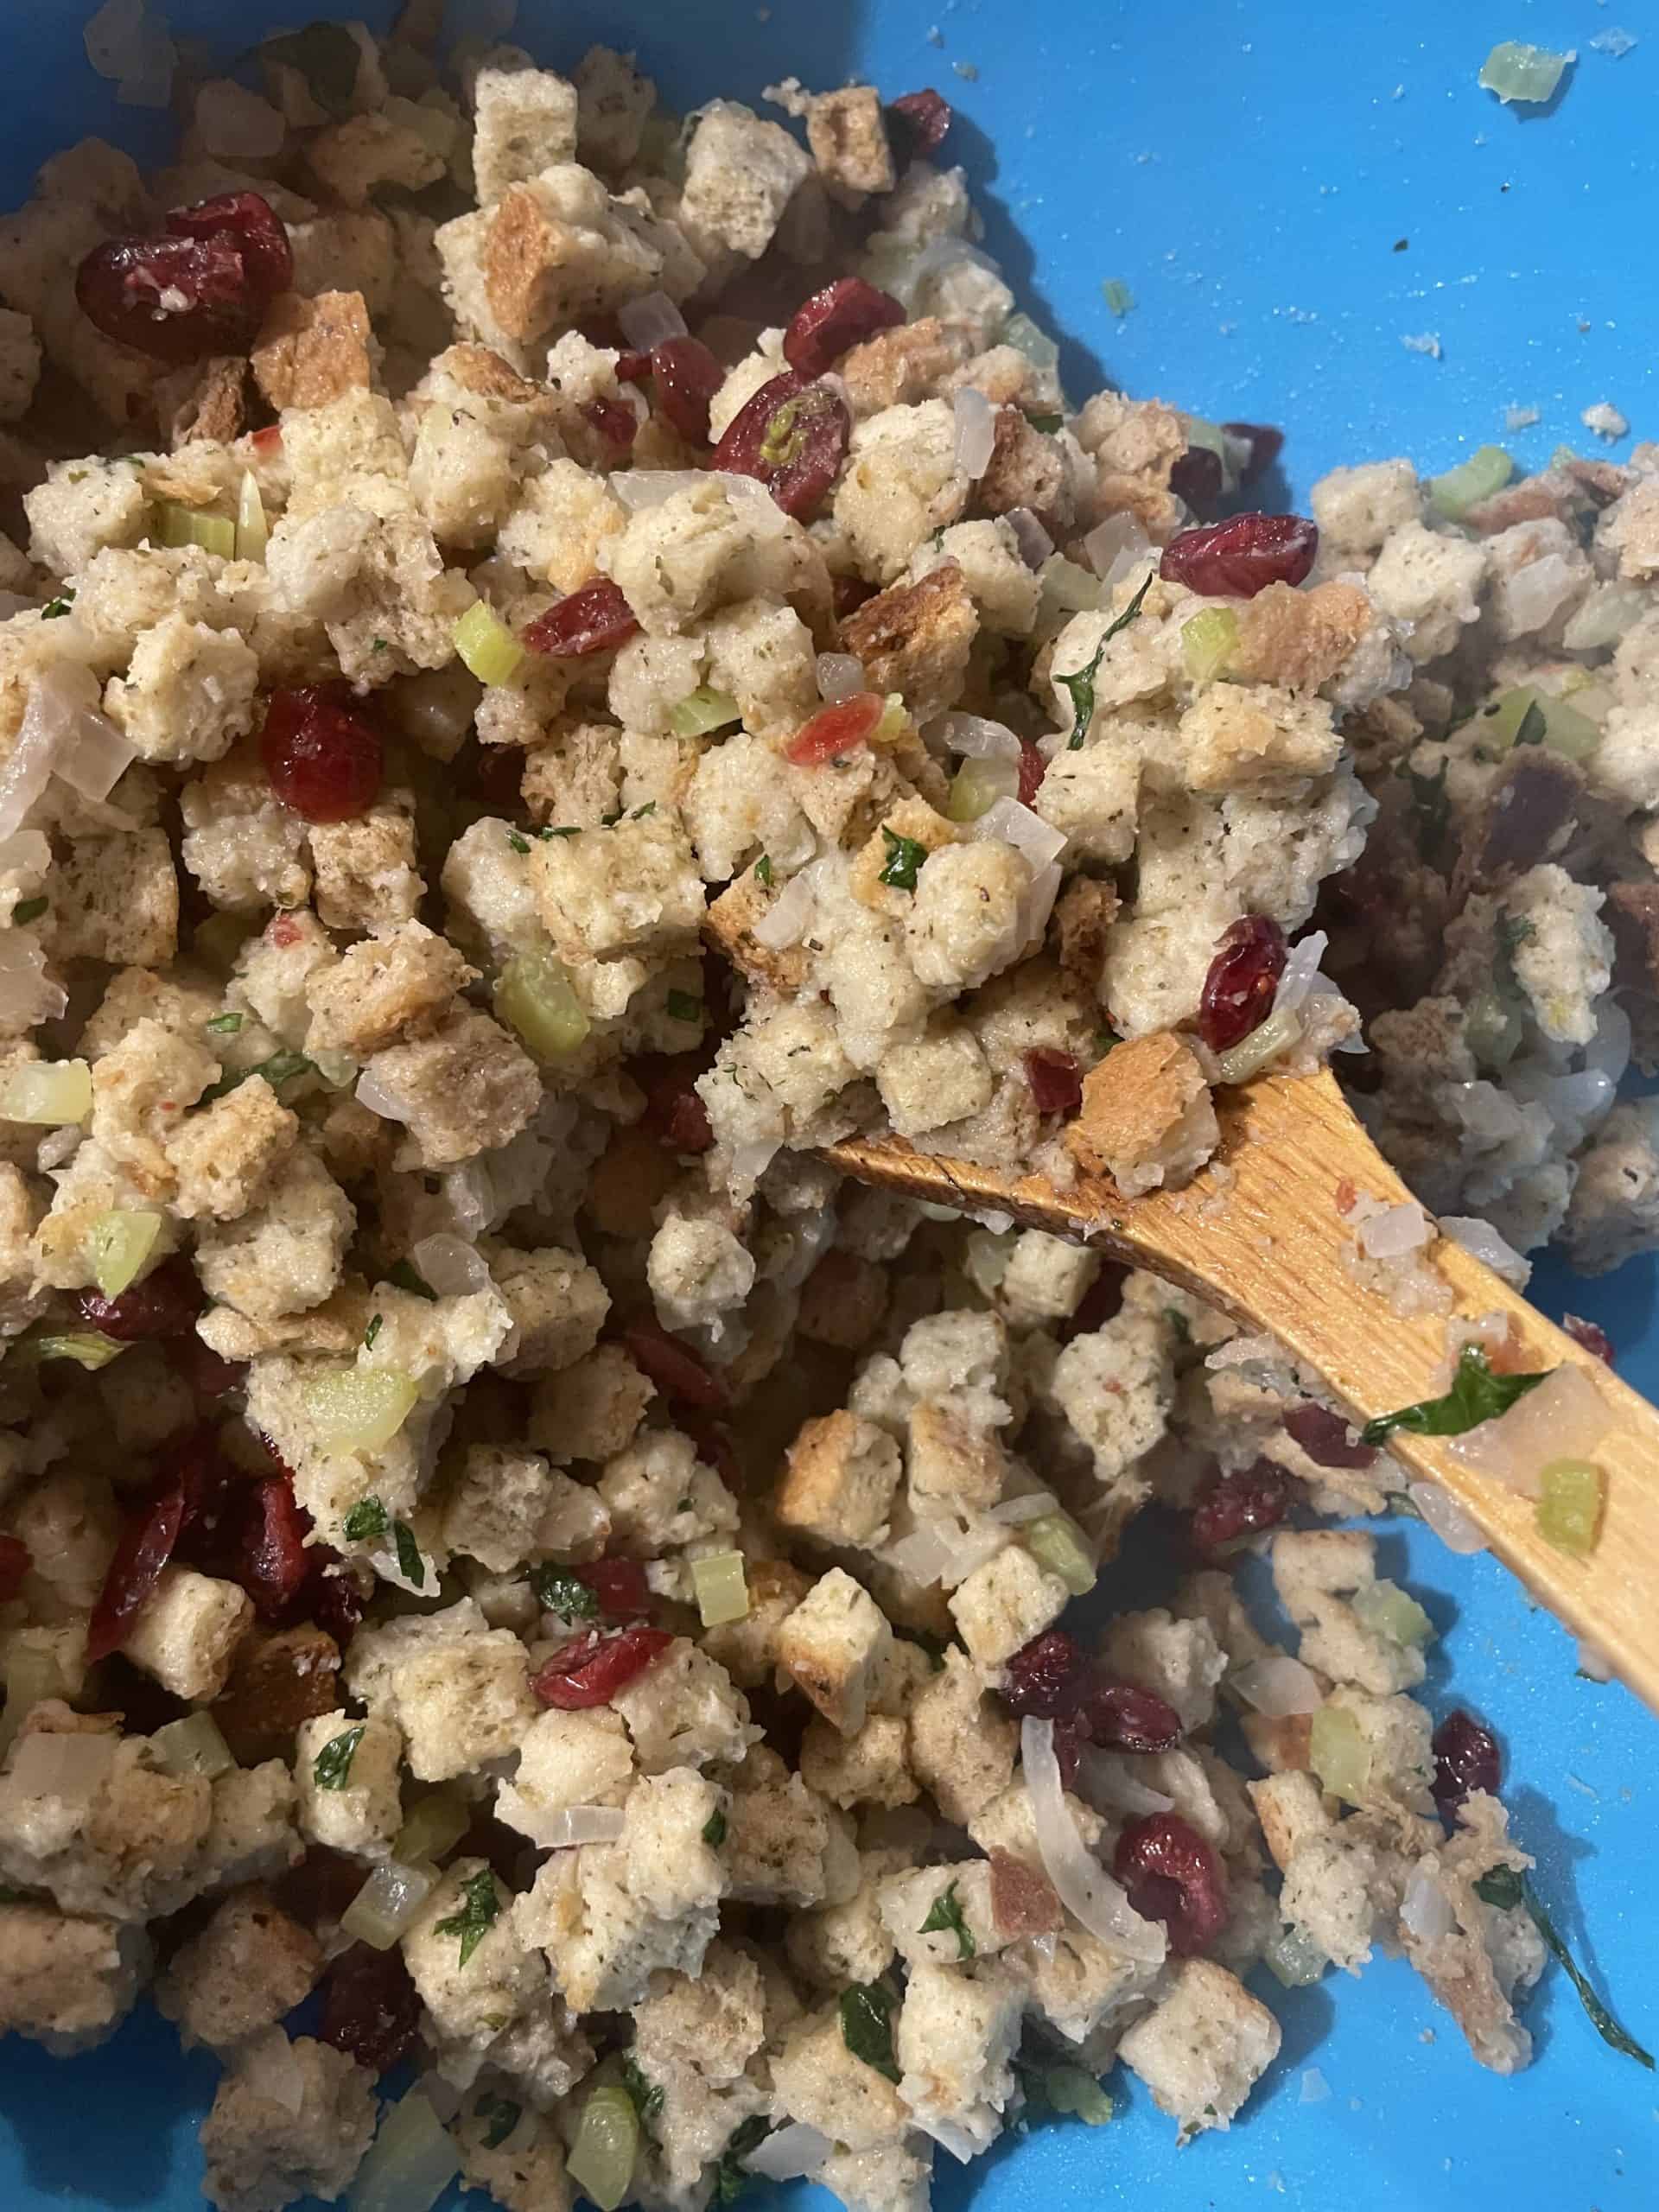 Mixed stuffing in a bowl.